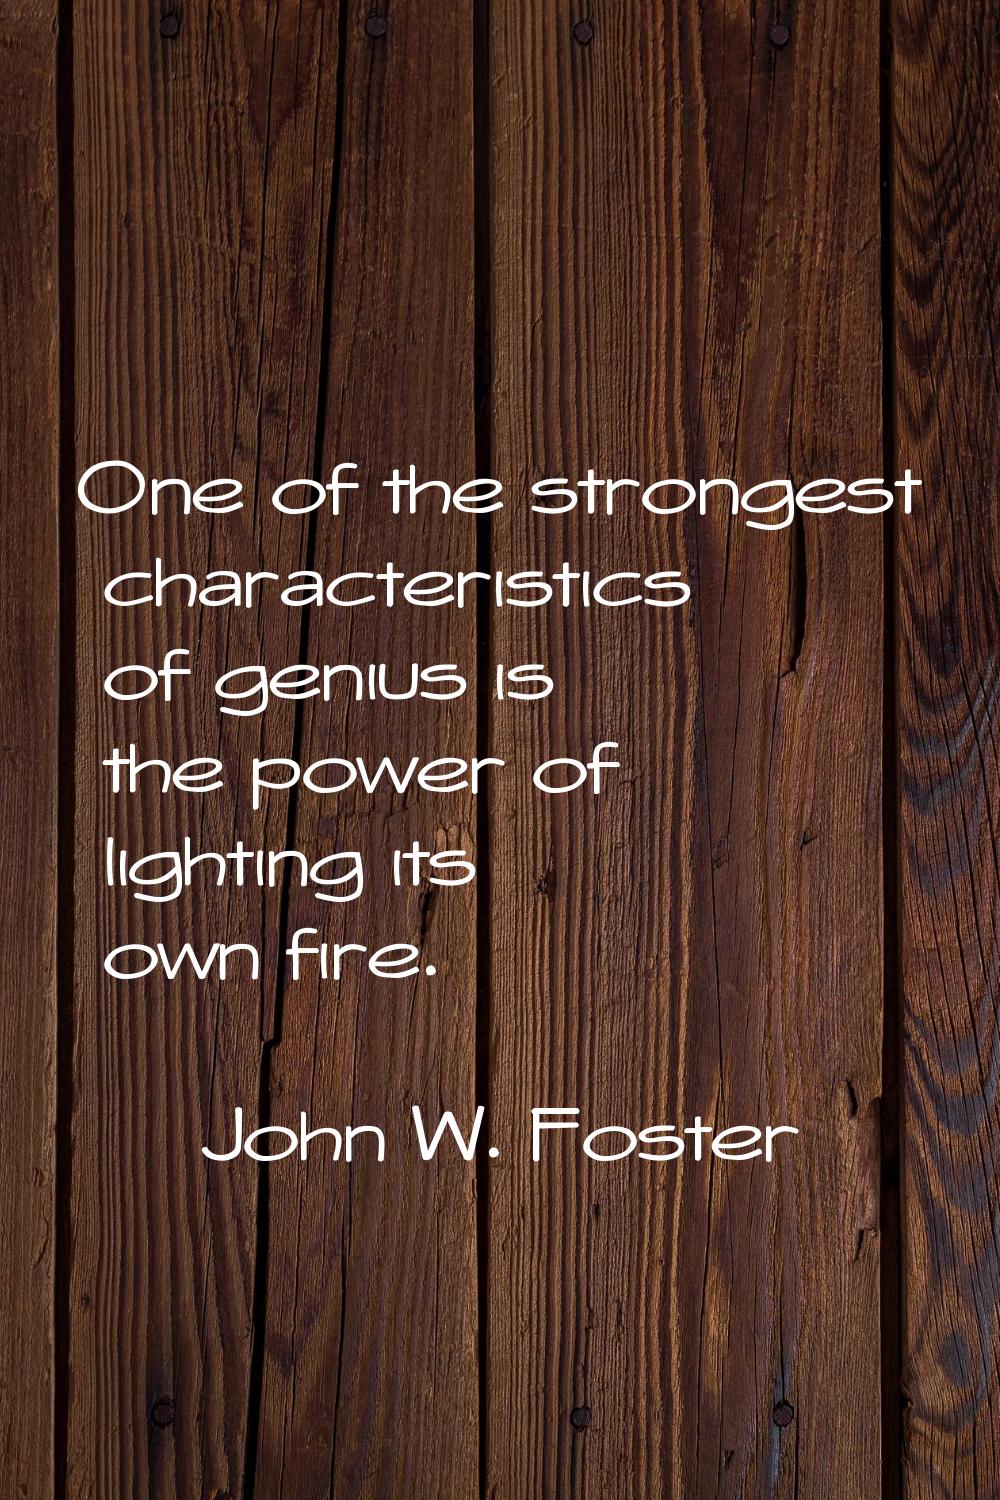 One of the strongest characteristics of genius is the power of lighting its own fire.